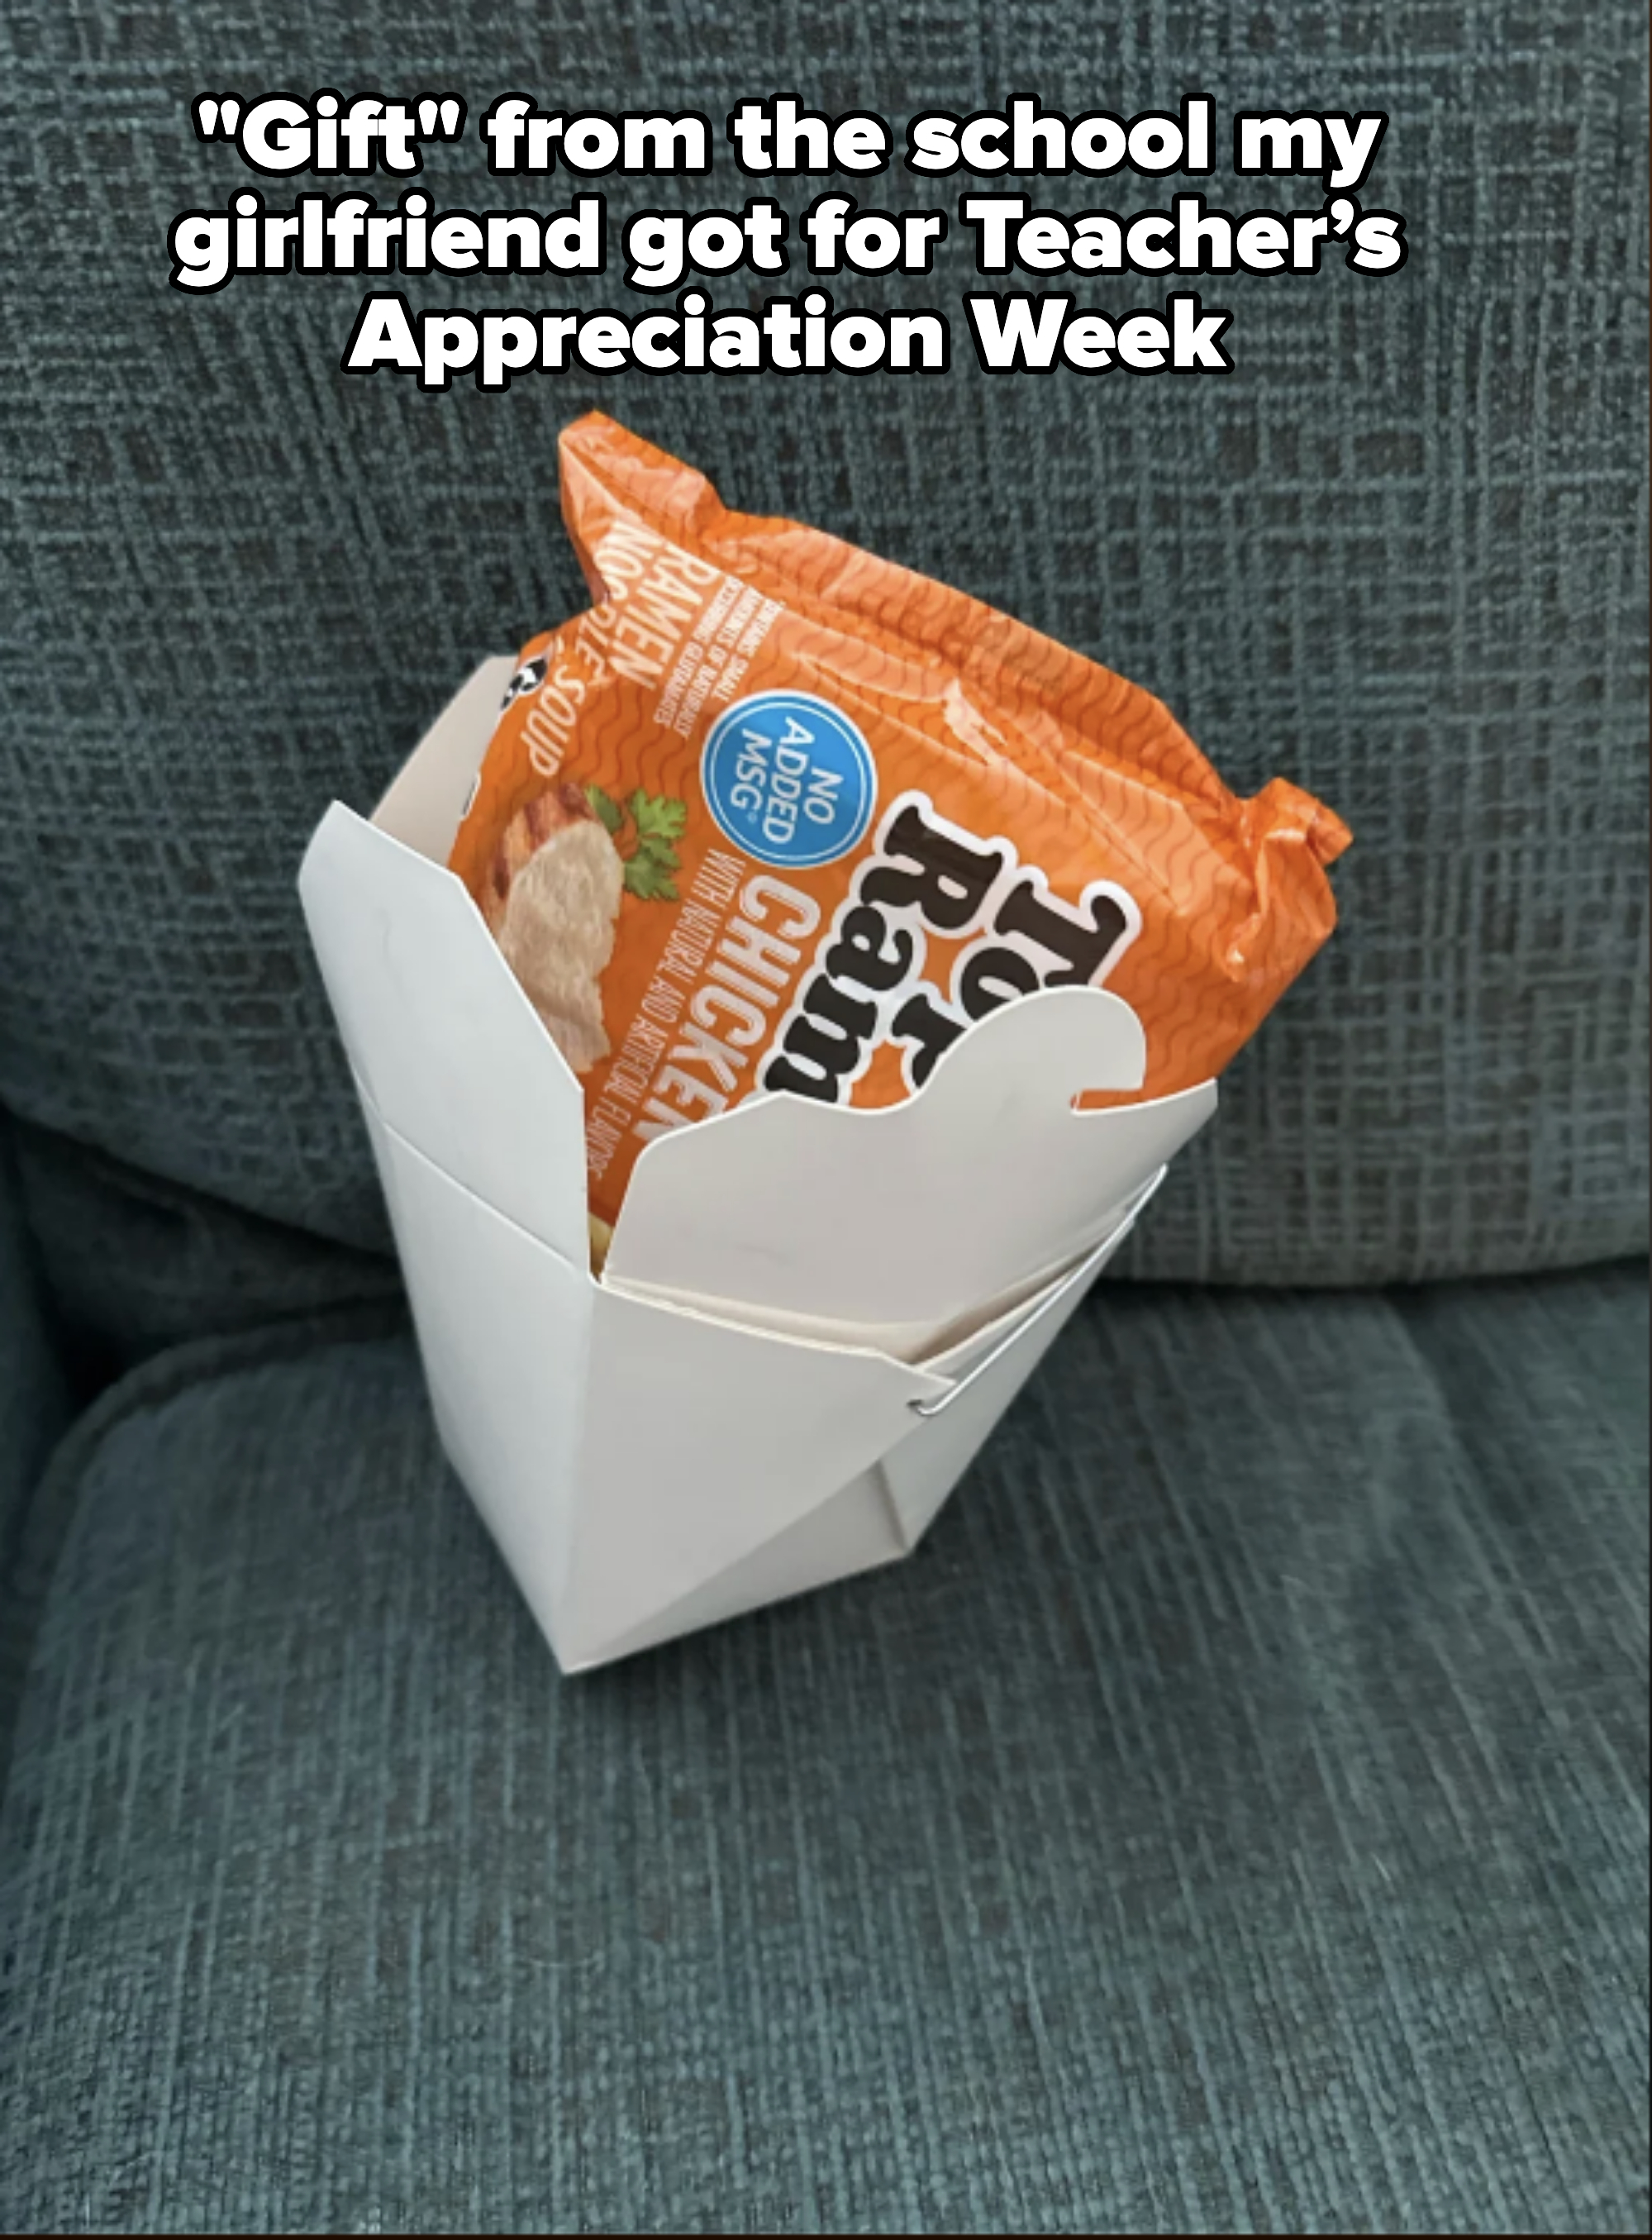 Top Ramen chicken noodle packet inside a white takeout container on a couch